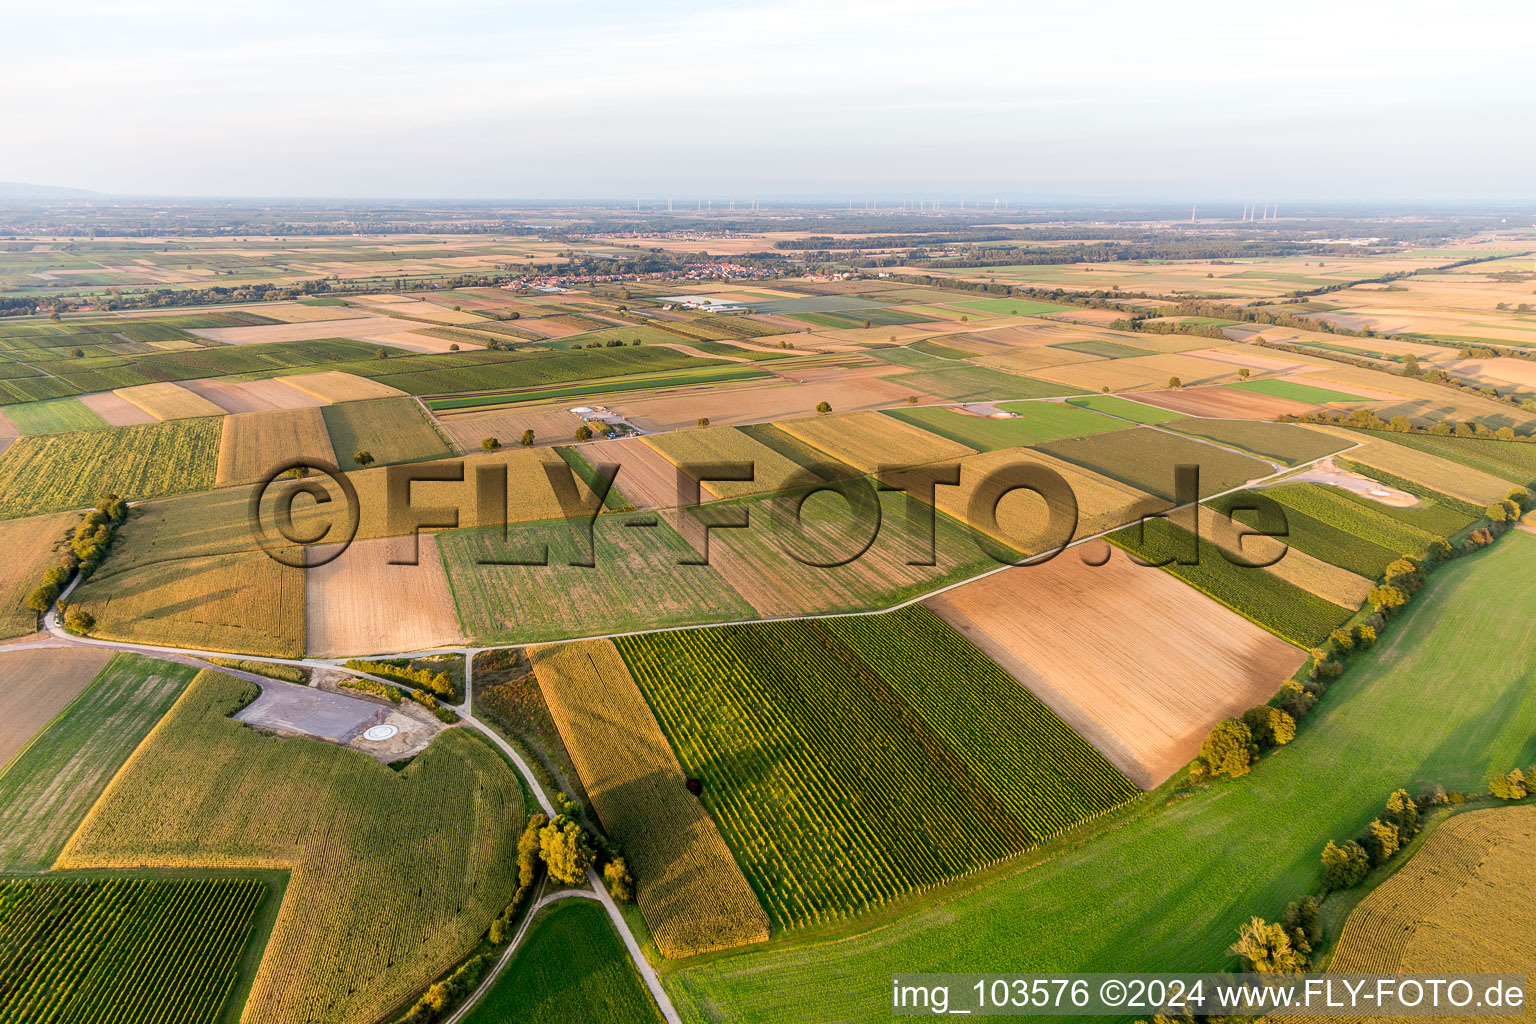 Construction site of the EnBW wind farm Freckenfeld - for a wind turbine with 6 wind turbines in Freckenfeld in the state Rhineland-Palatinate, Germany viewn from the air